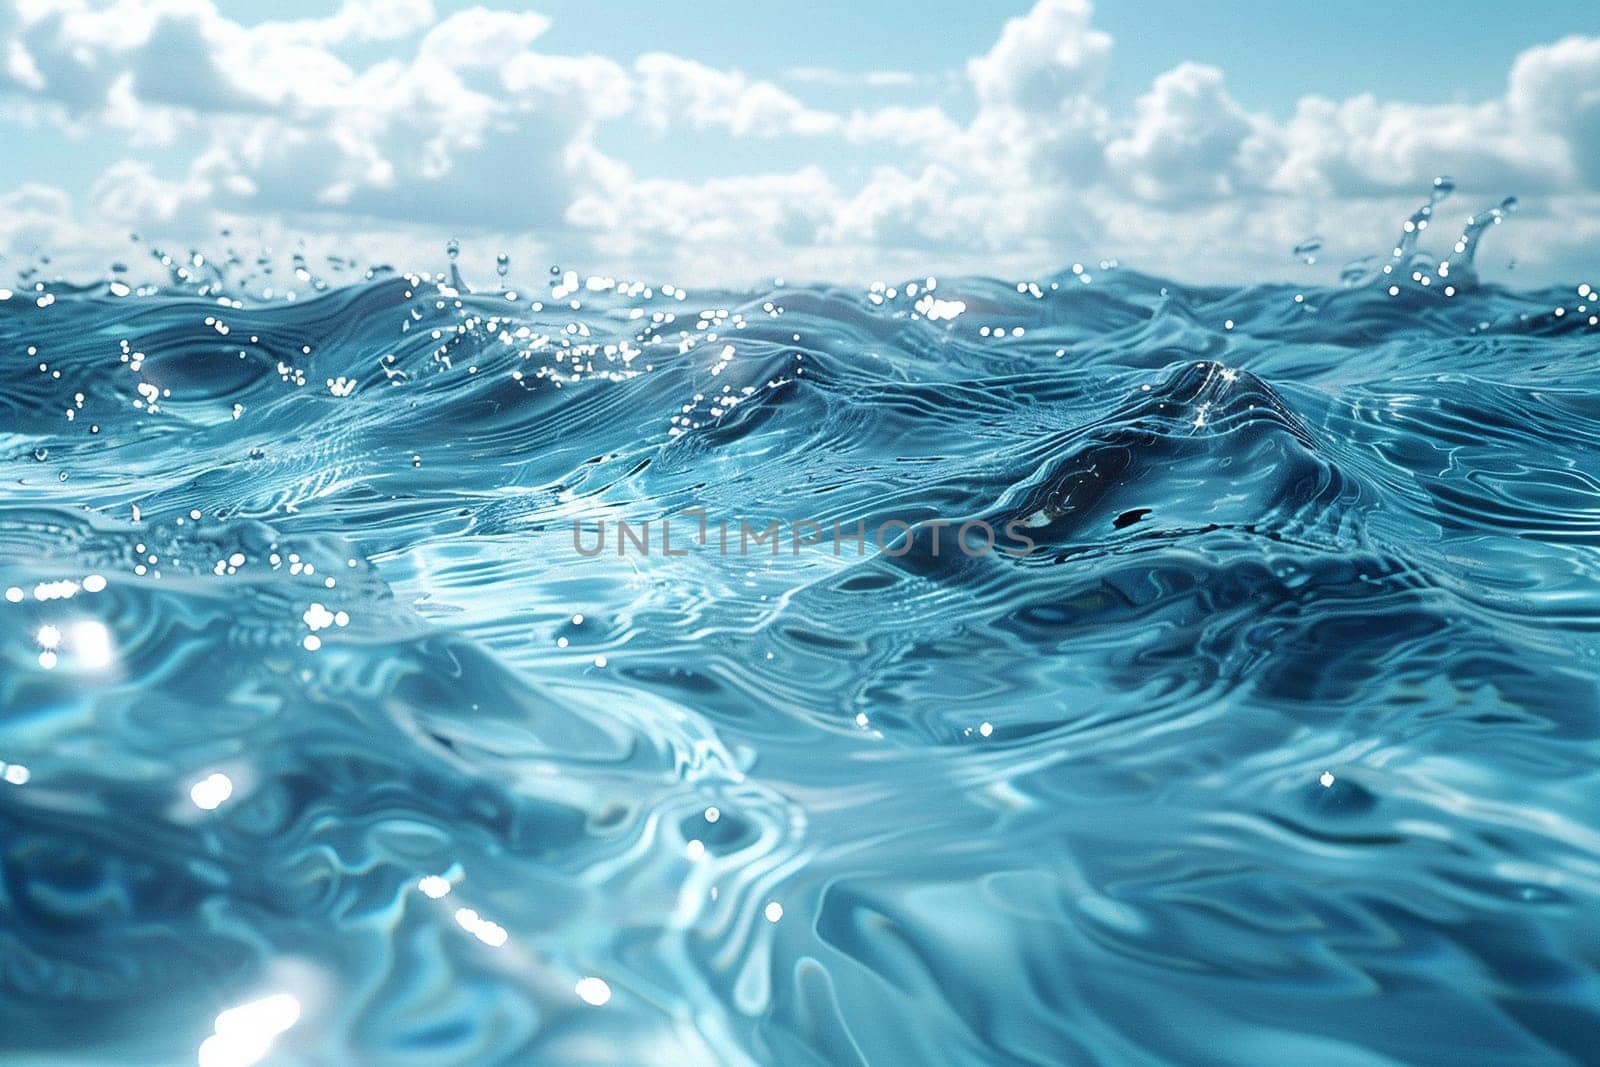 Rippling water surface with gentle waves, great for peaceful and calming themes.